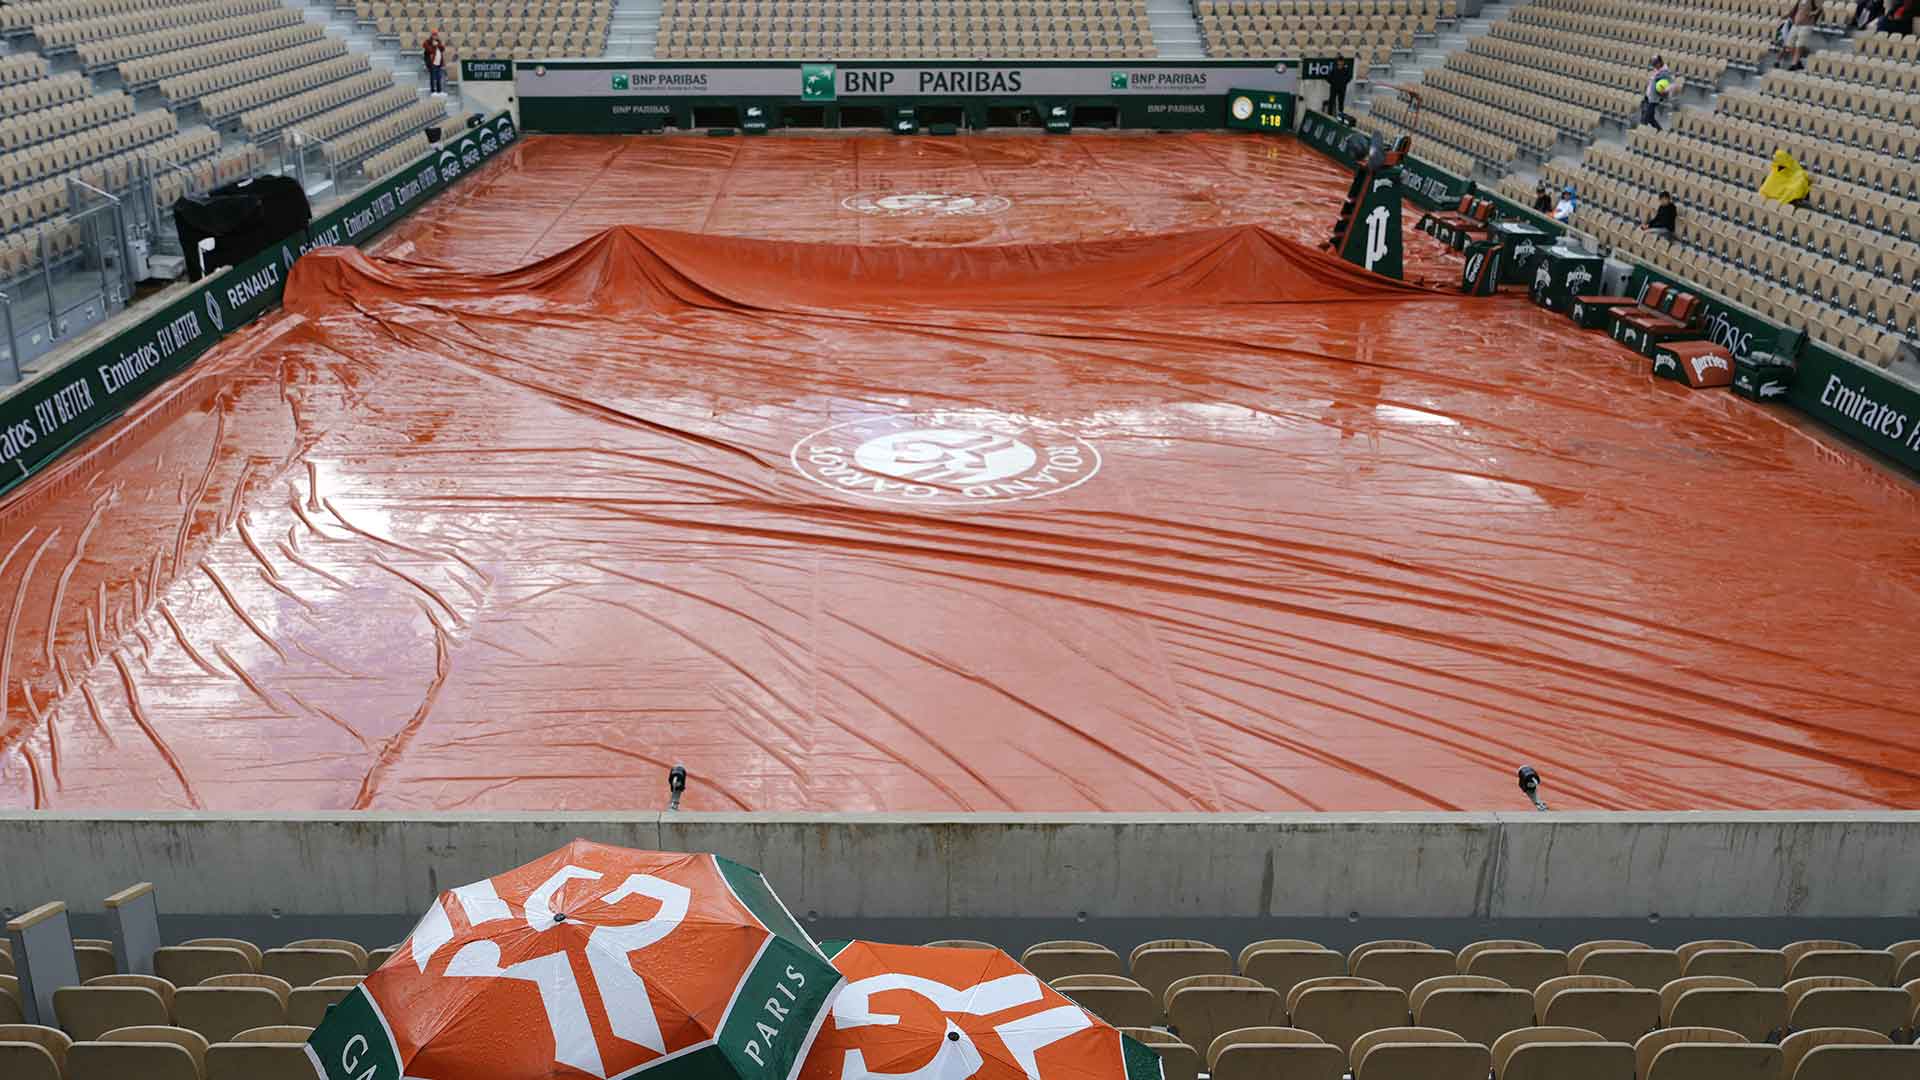 Rain cancels play on outside courts at Roland Garros Wednesday